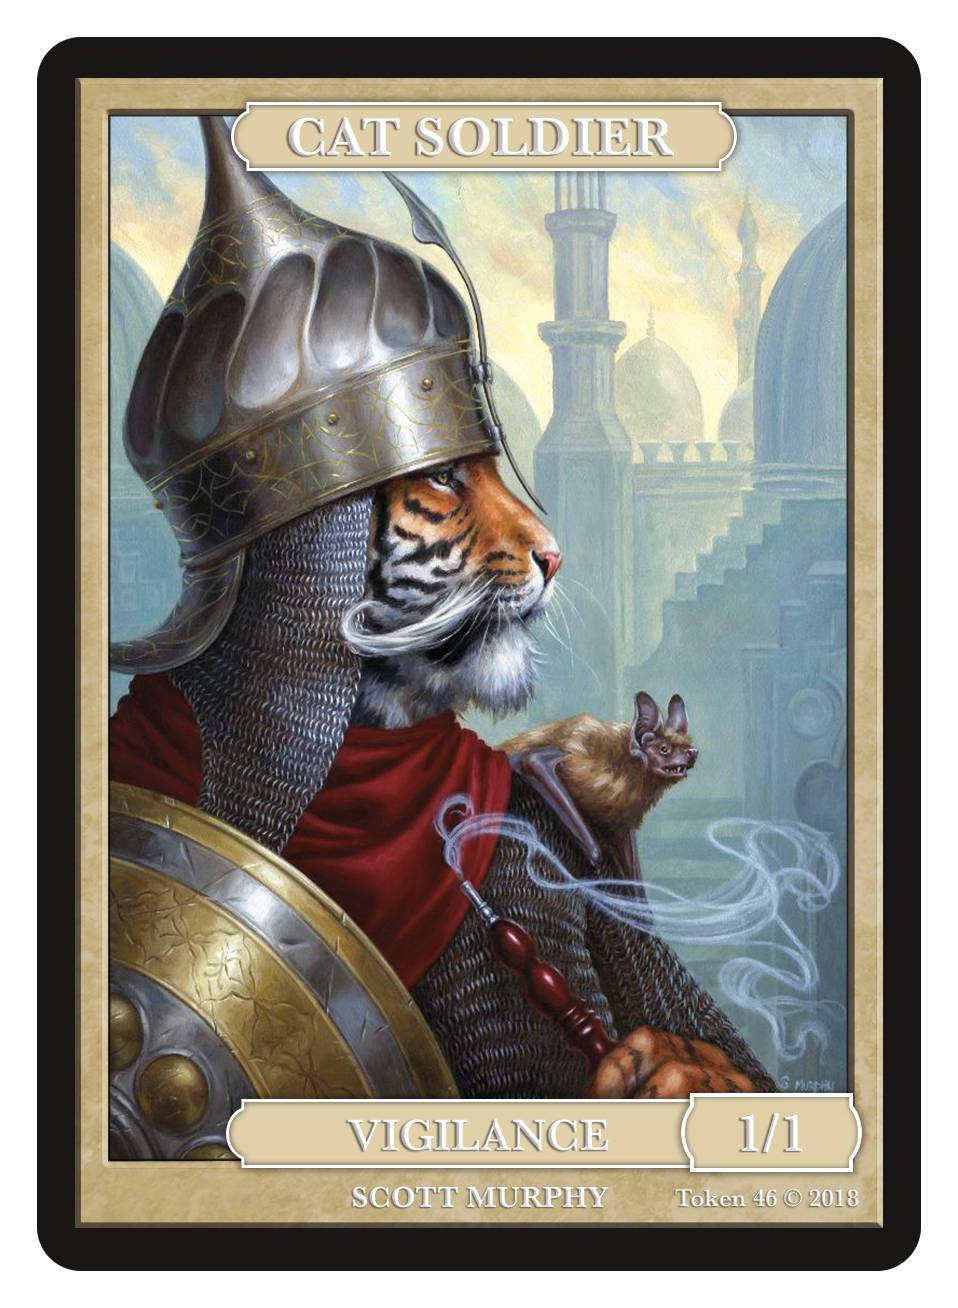 Cat Soldier Token (1/1 - Vigilance) by Scott Murphy - Token - Original Magic Art - Accessories for Magic the Gathering and other card games